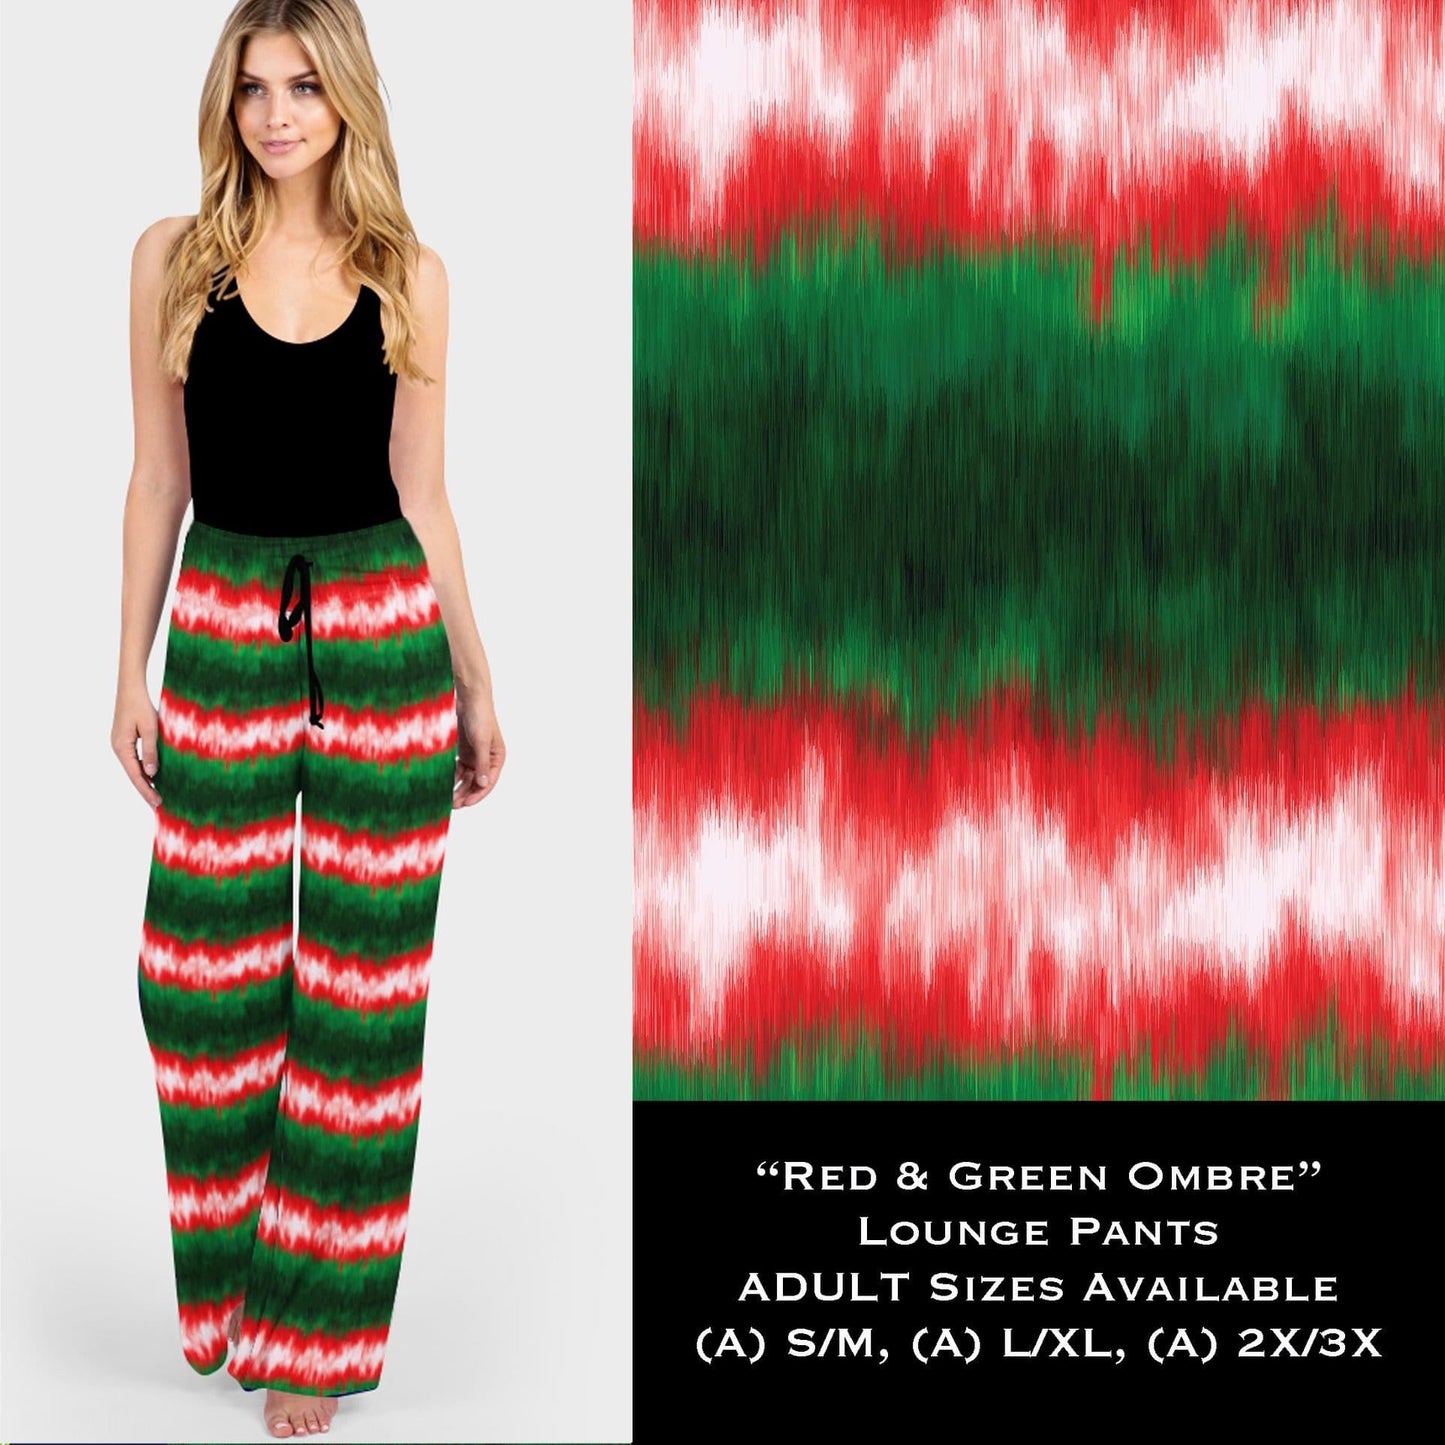 Red & Green Ombre - Lounge Pants